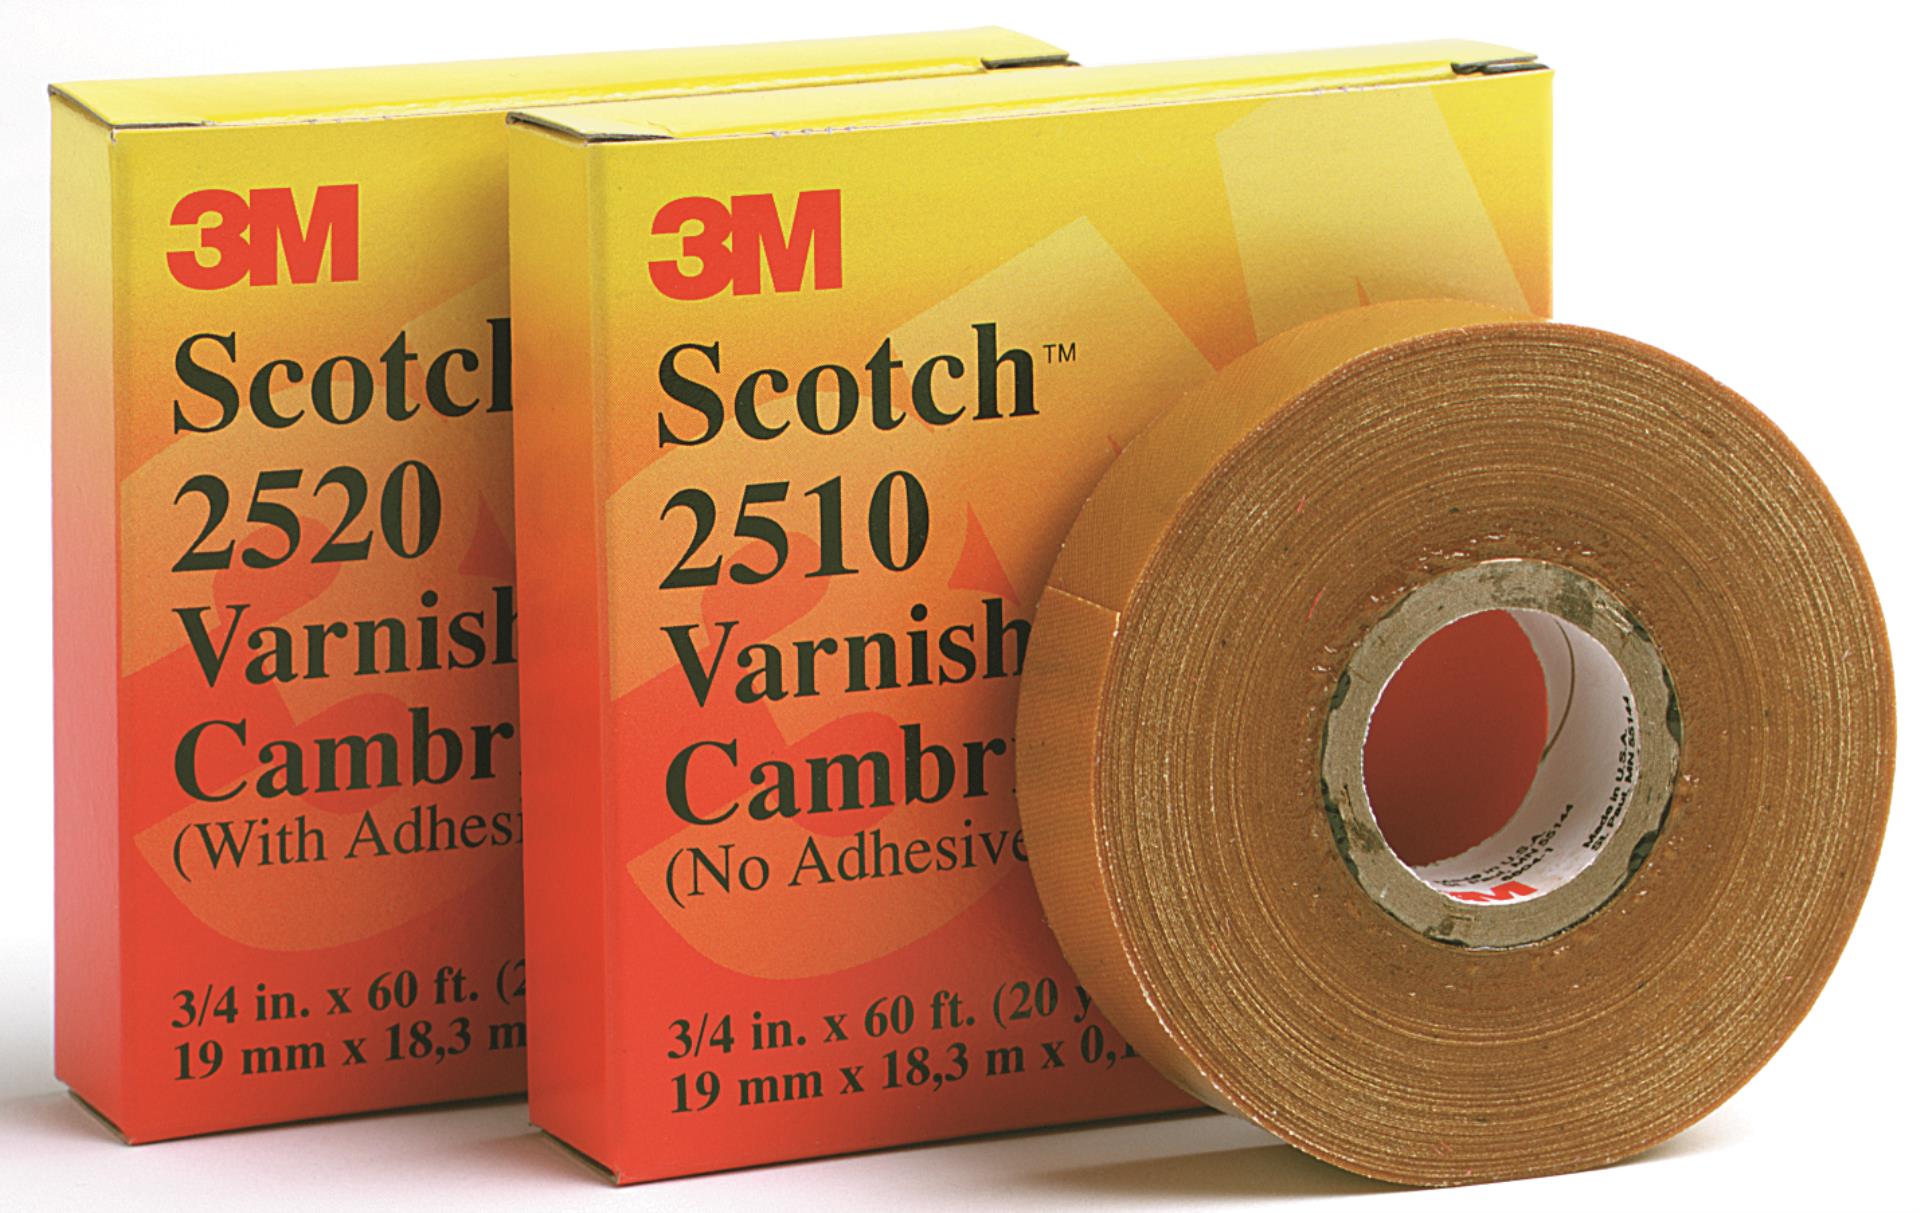 Translucent x 15 ft. 72mm actual 3M Scotch 4411 Extreme Sealing Tape: 3 in. 